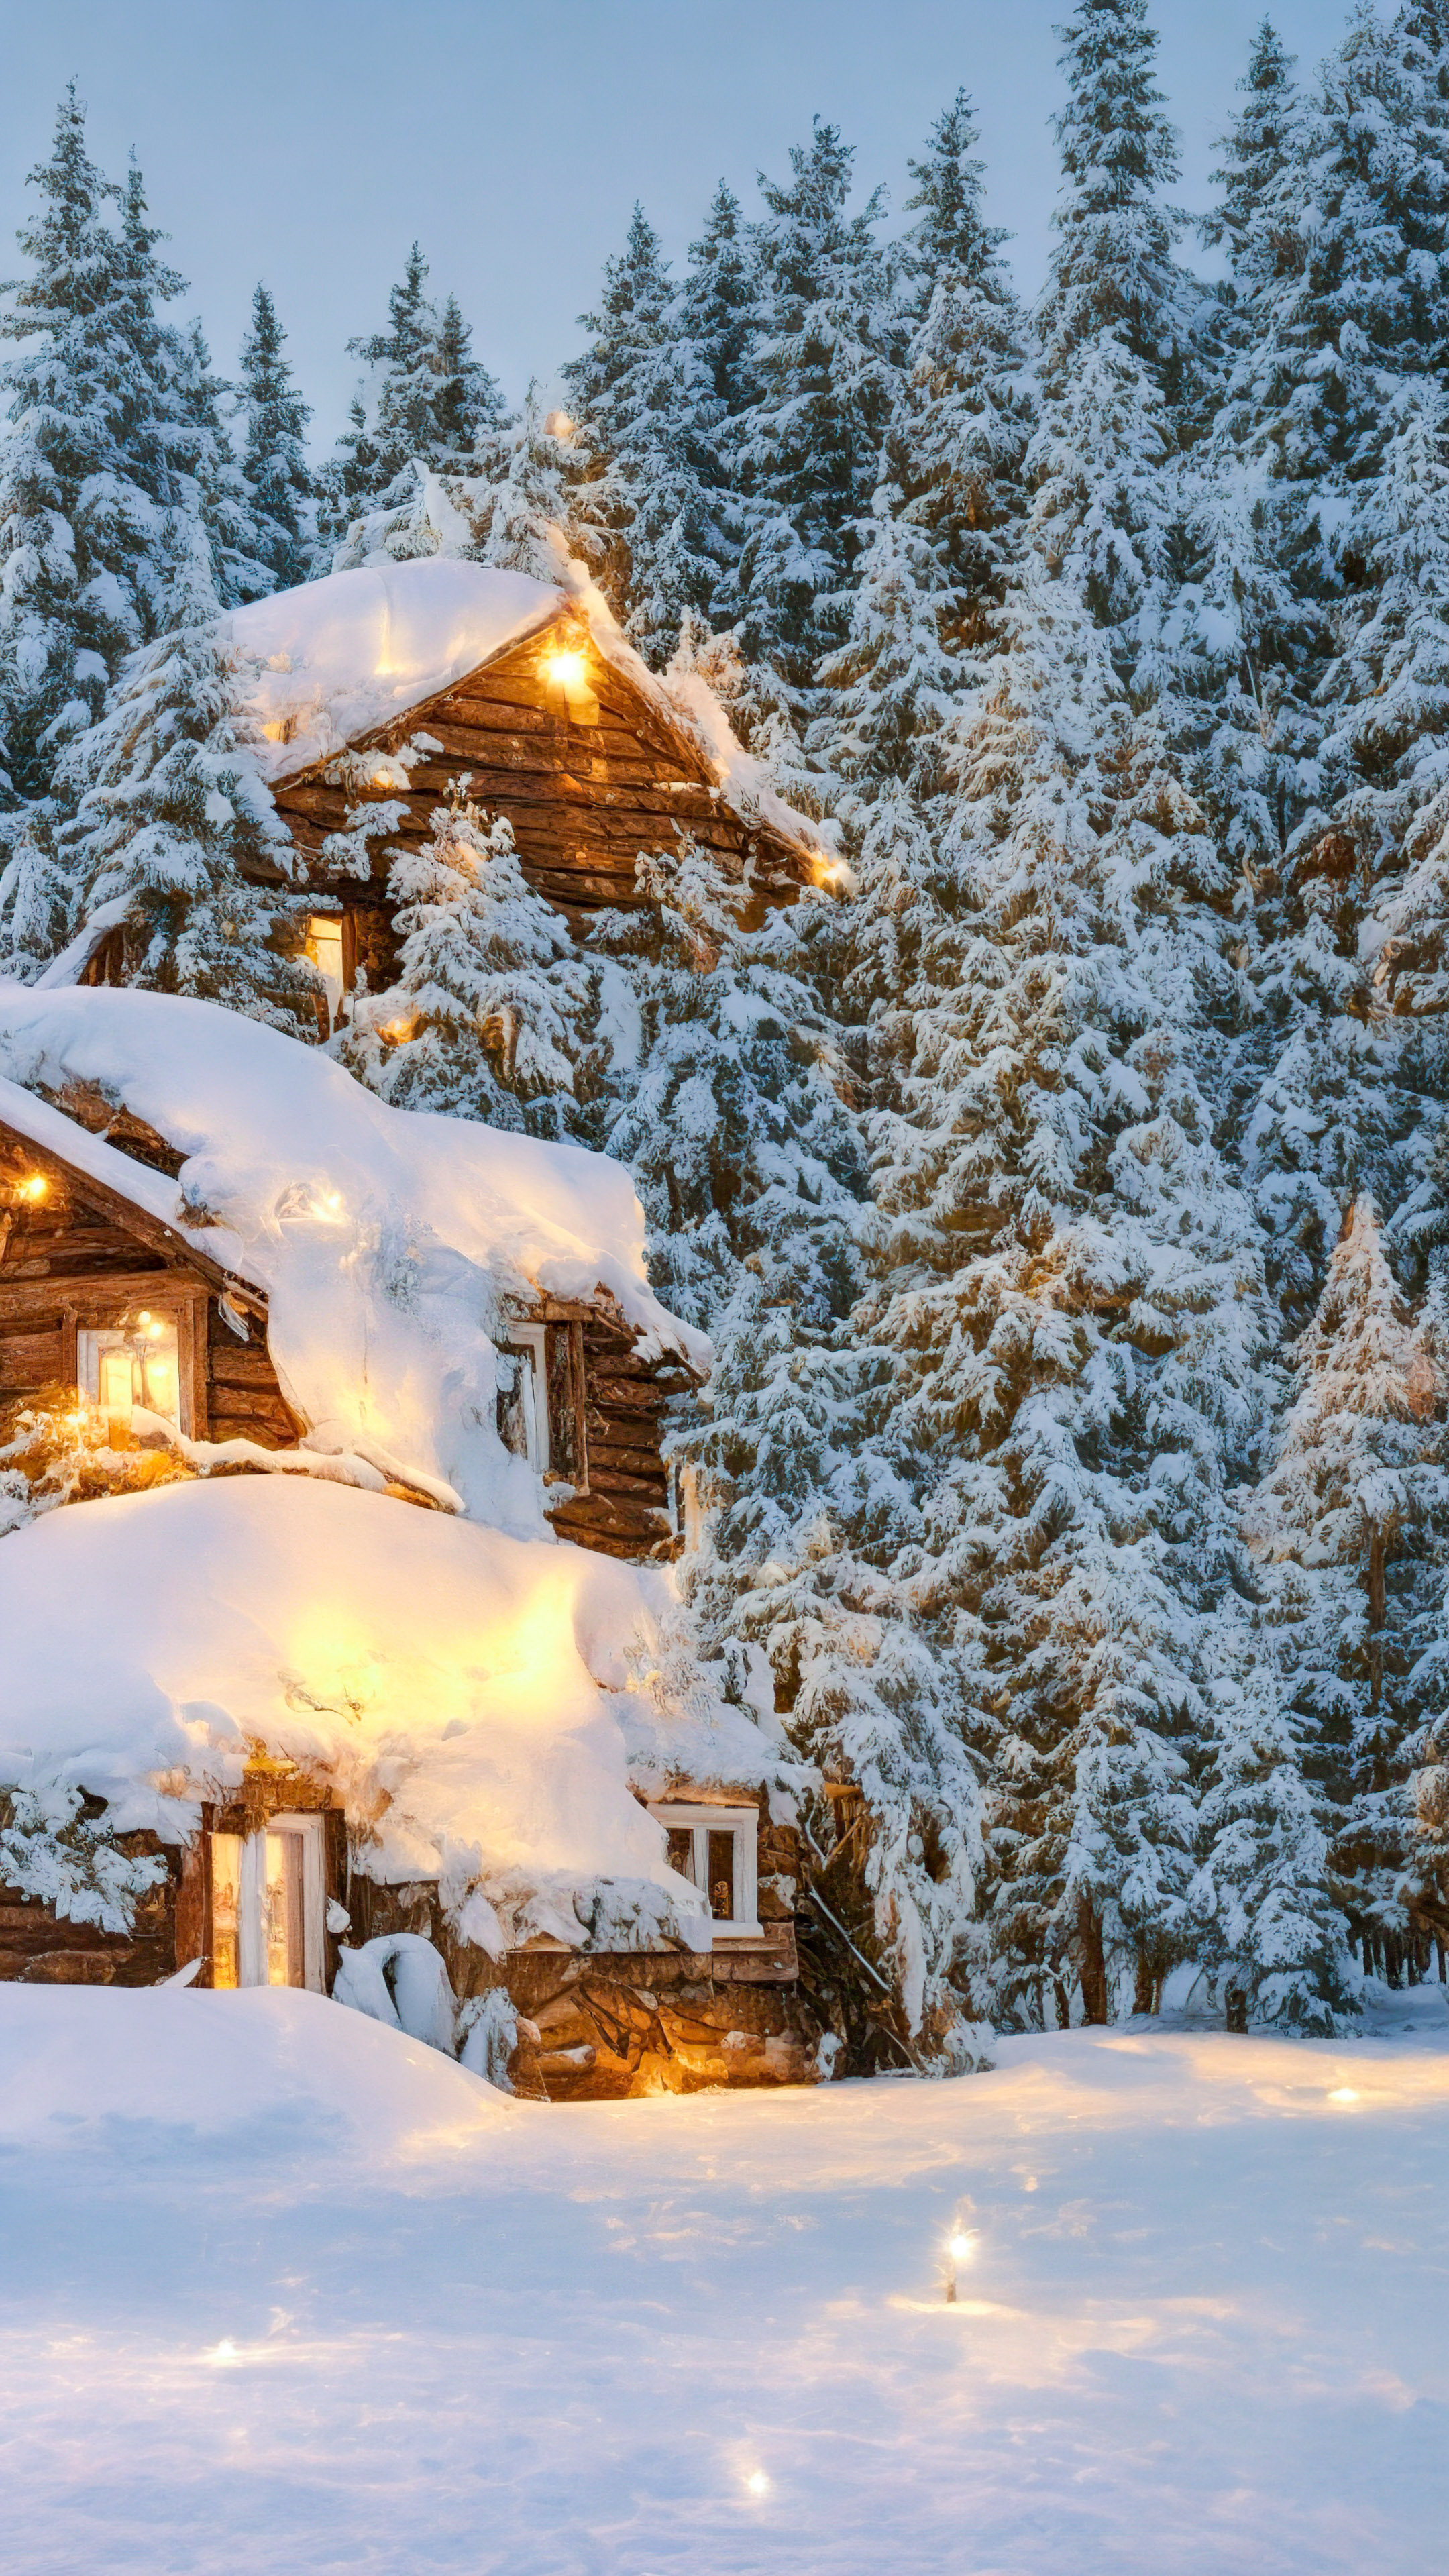 Experience the tranquility of a serene winter wonderland, where snow-covered trees and a cozy cabin adorned with holiday lights come alive in our 4K beautiful nature wallpaper.